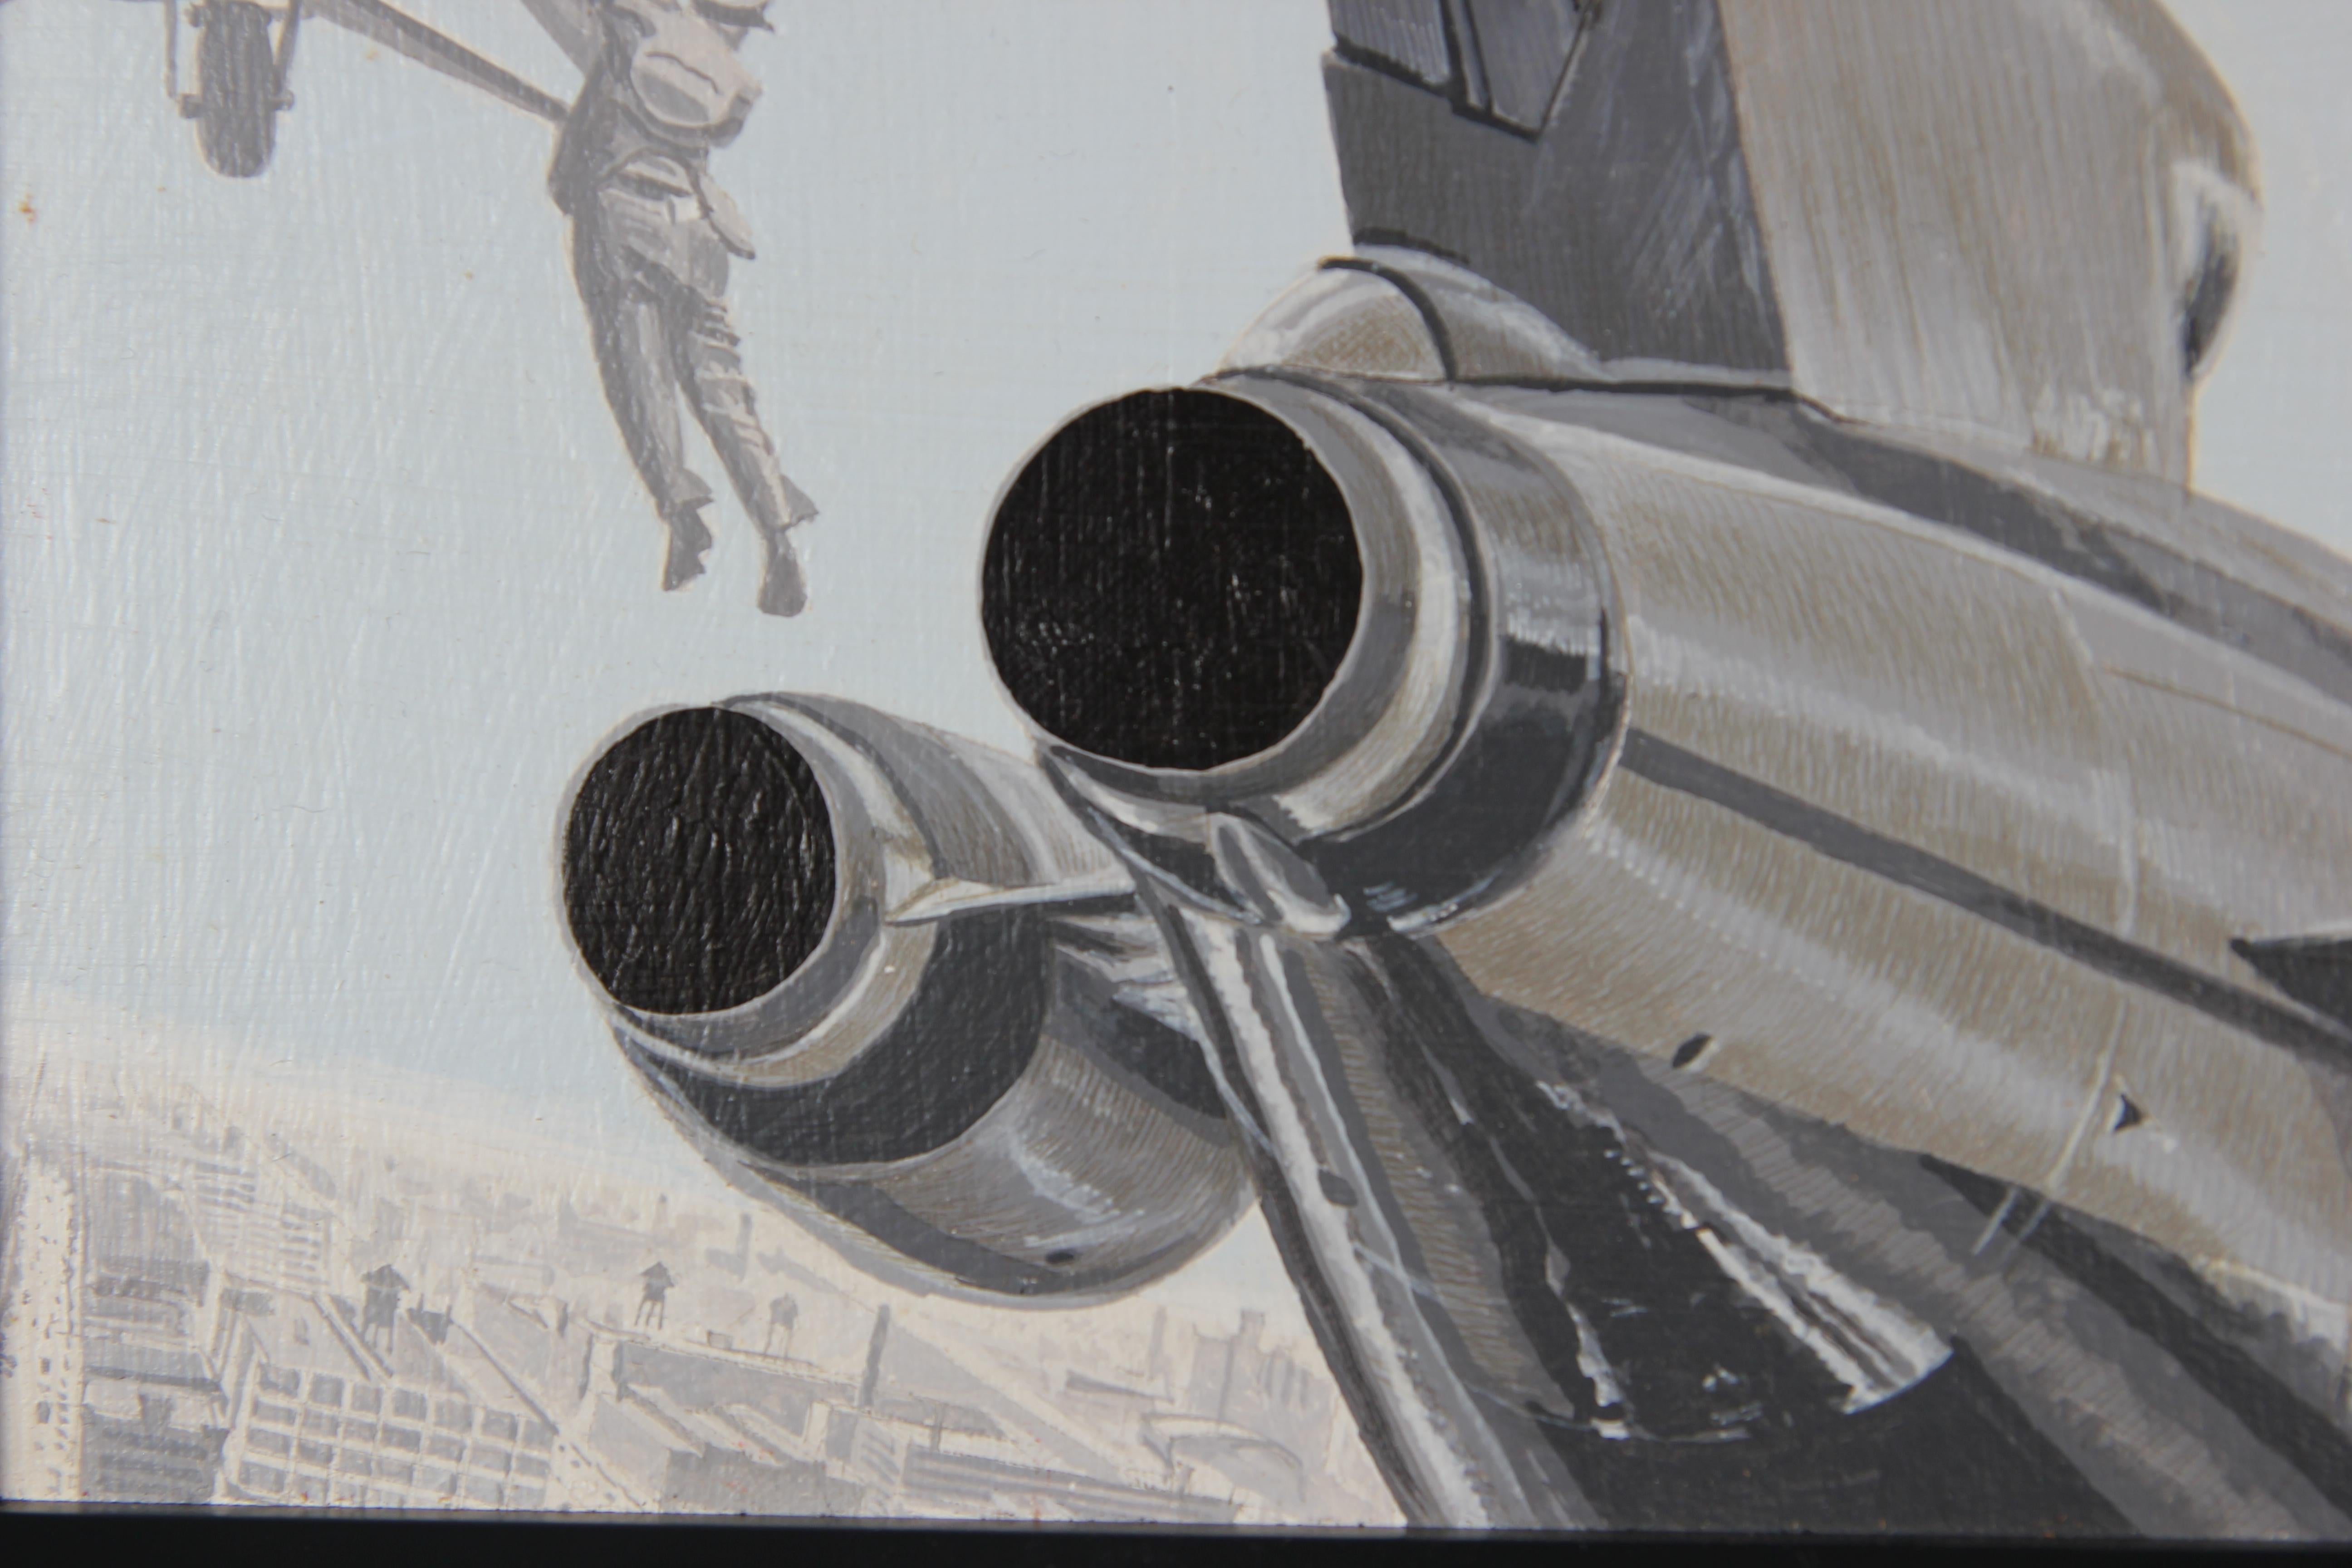 Surrealist painting of a close up of a tail of an airplane. In the background, there is a man hanging off a helicopter. Below the scene is a birds-eye view of a city. The work is signed, titled and dated by the artist. The board is framed in a black